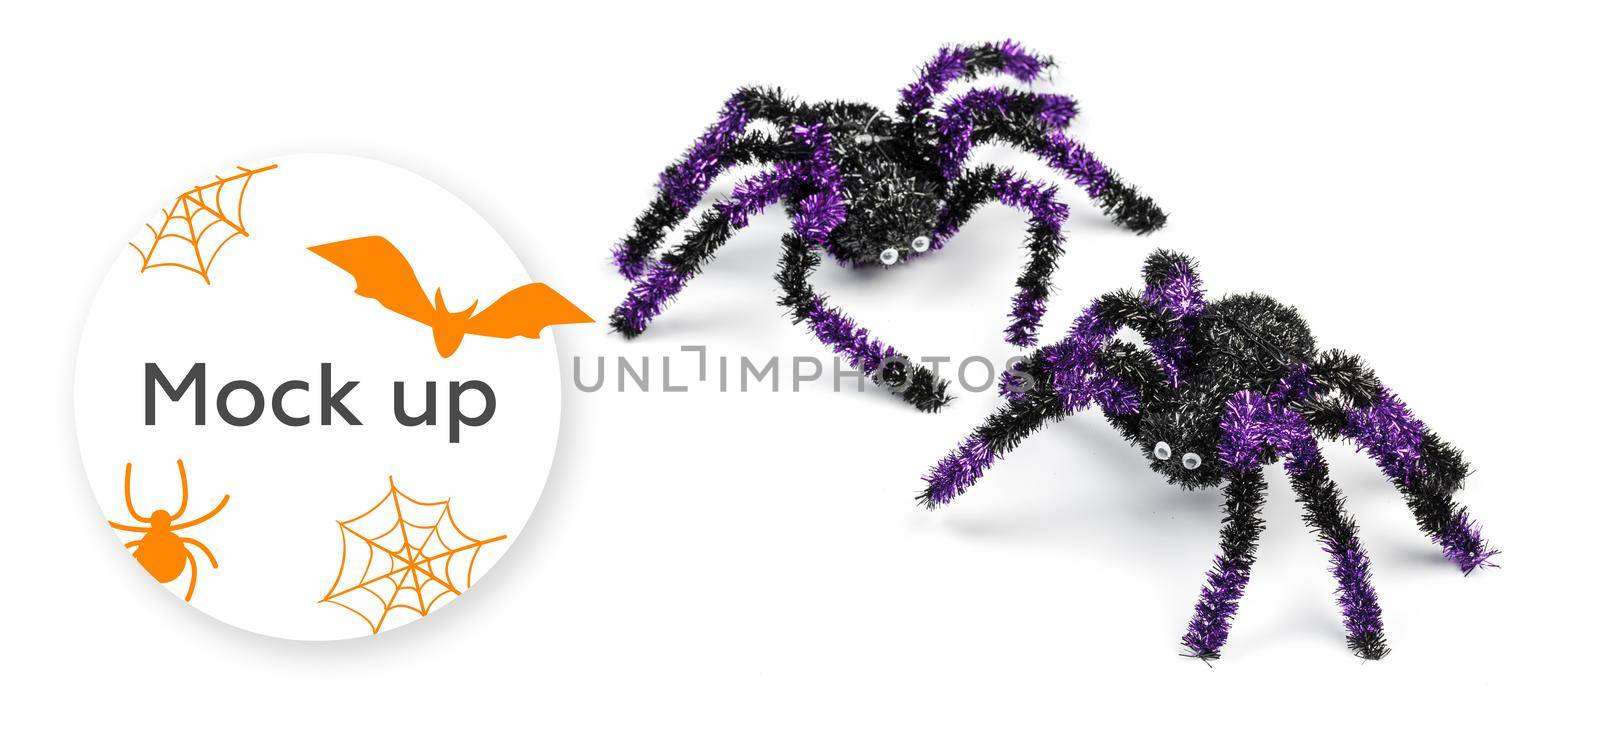 Halloween scary concept with decorative spiders on white background by Fabrikasimf